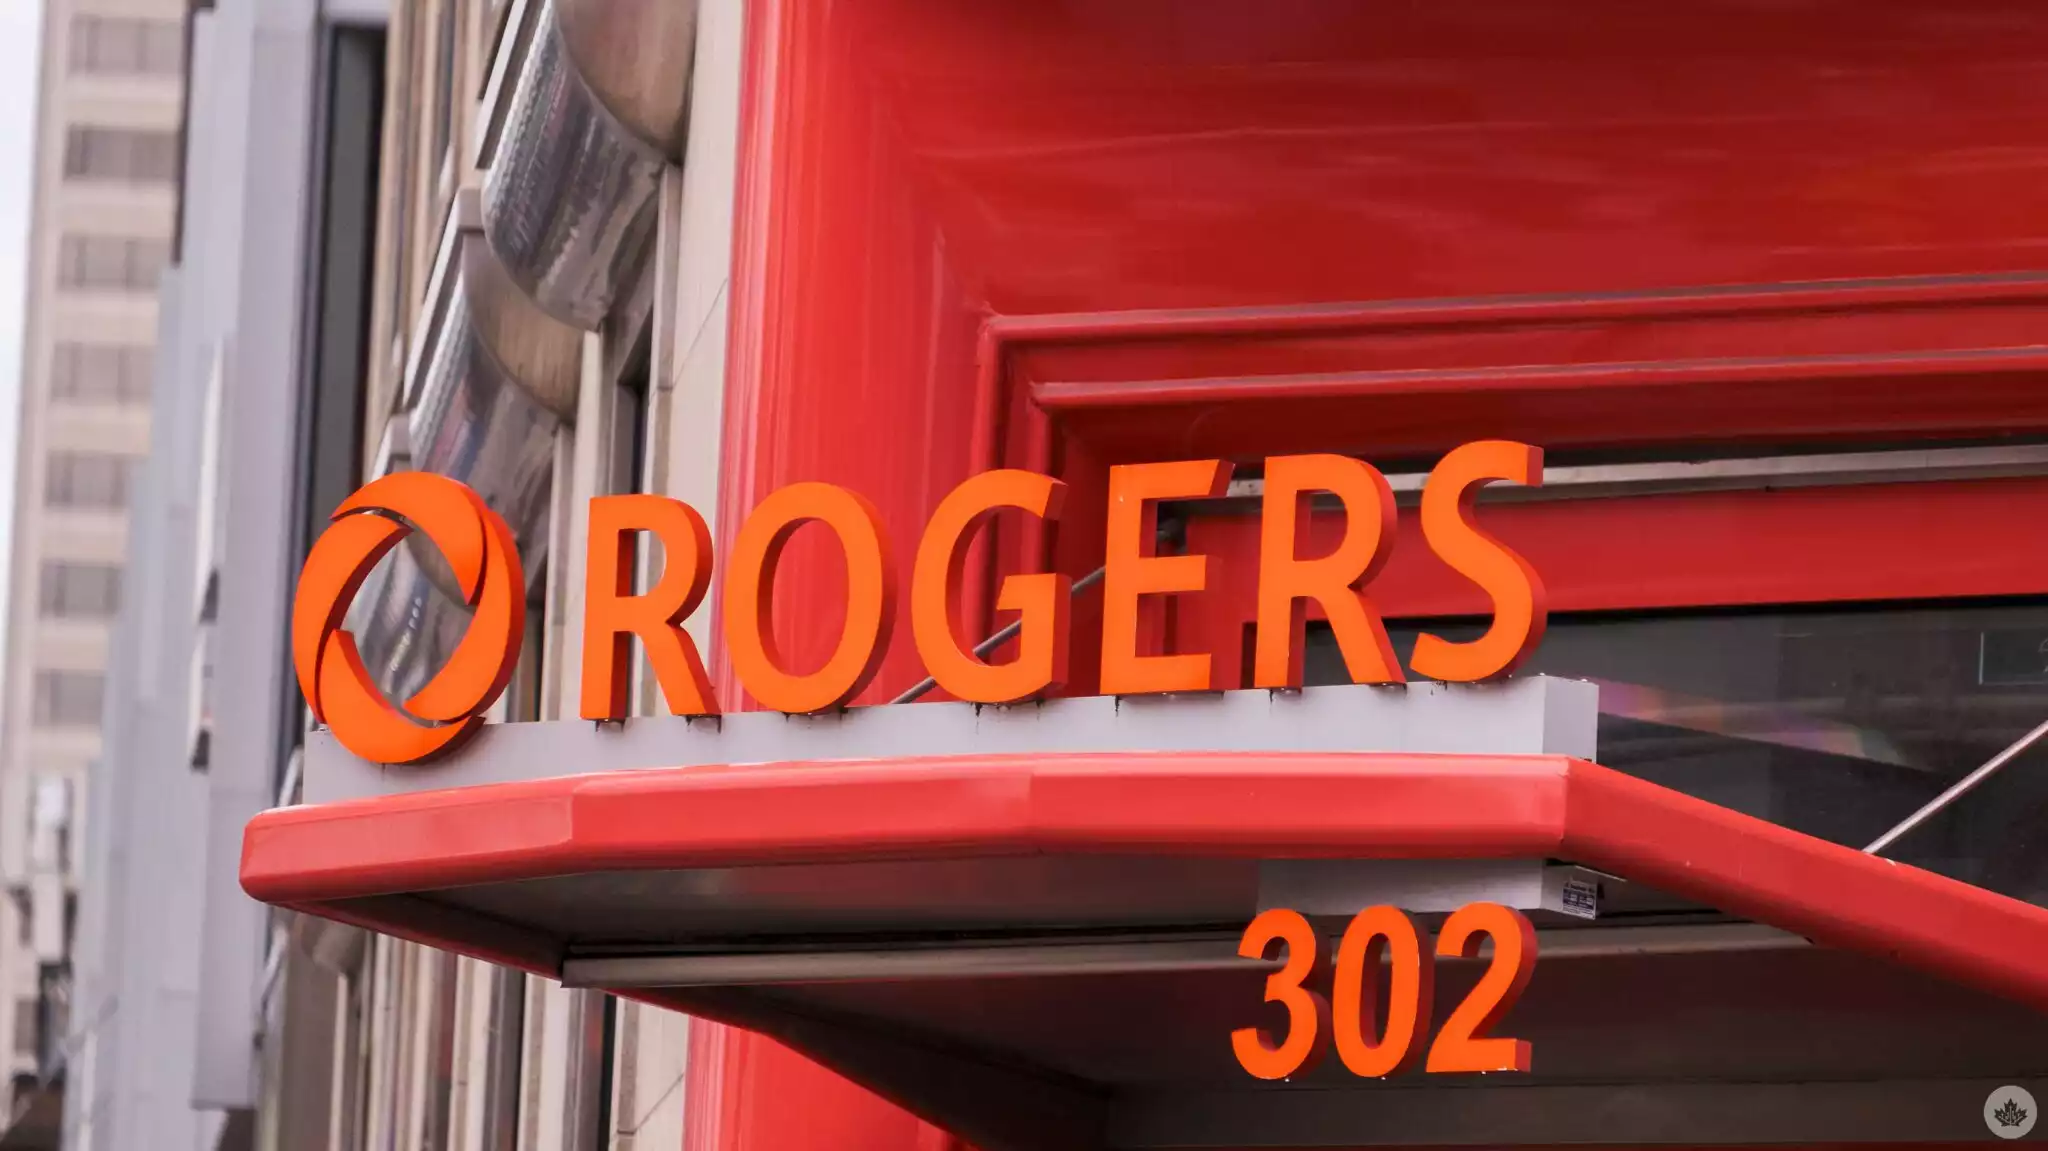 Here are some of the many services impacted by the Rogers outage